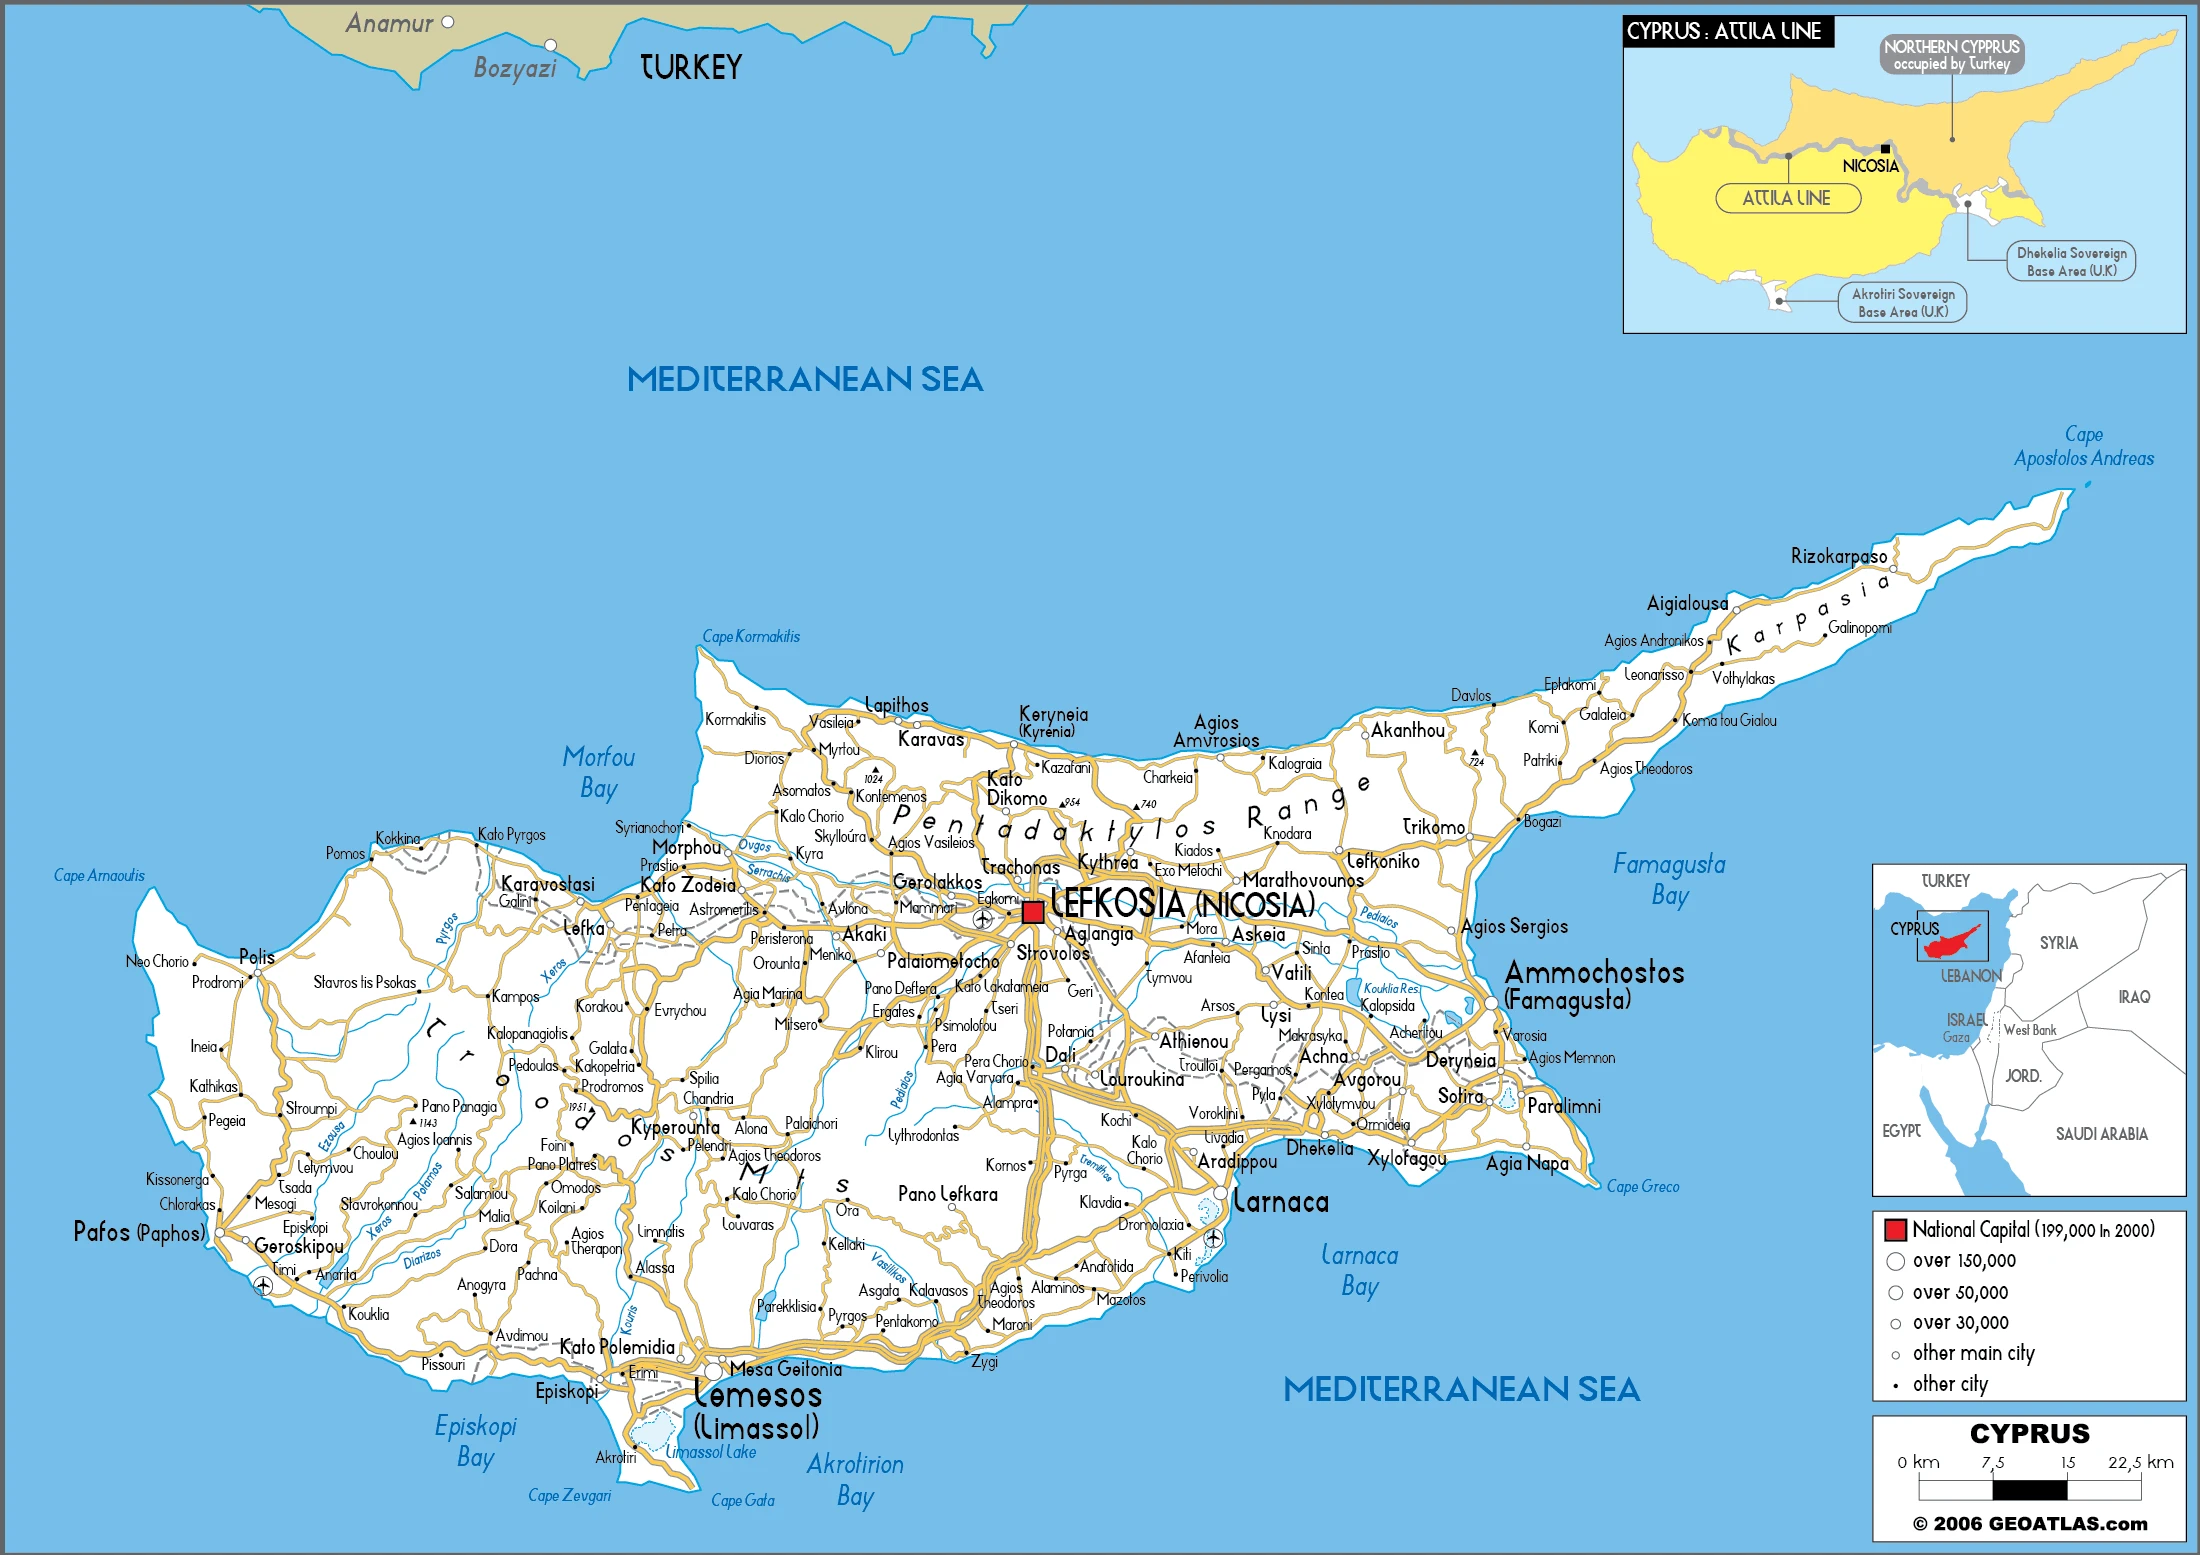 The route plan of the Cypriot roadways.